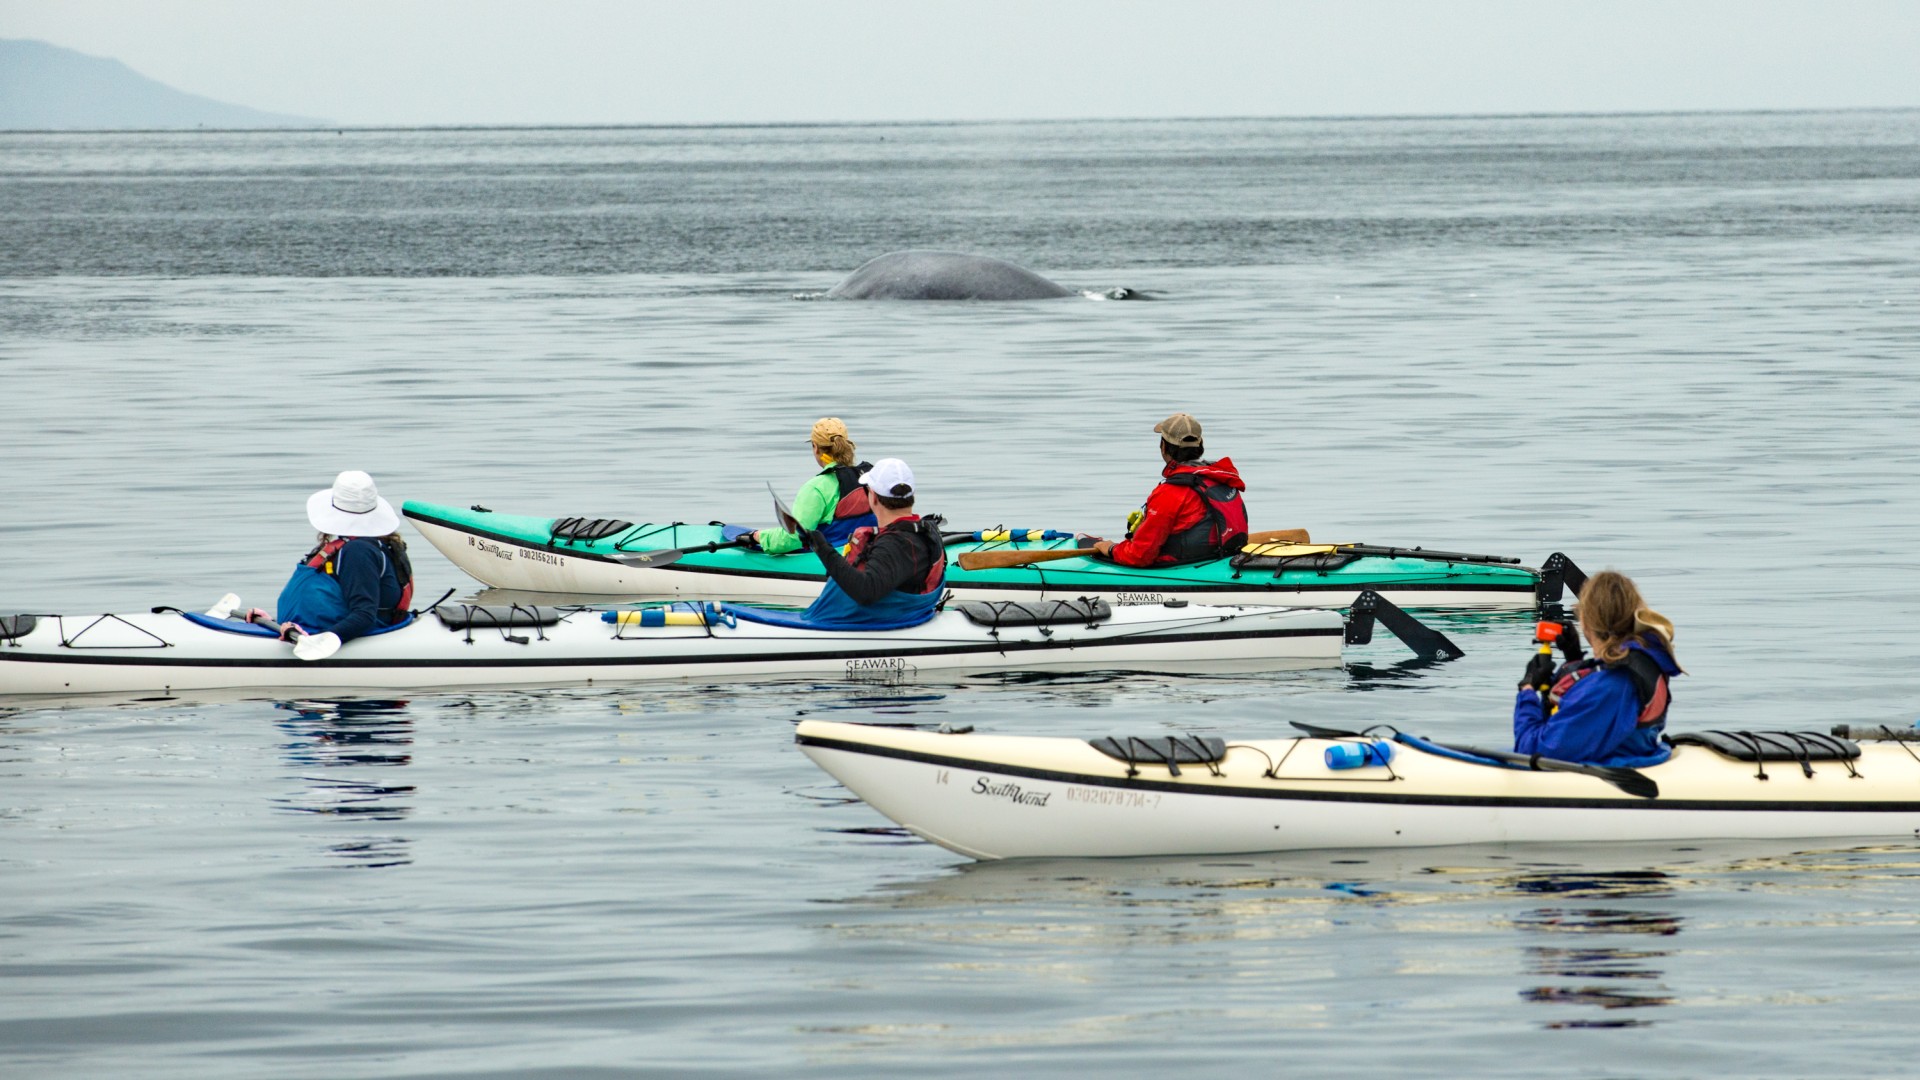 Sea kayakers paddling close to a whale swimming by in the Sea of Cortez